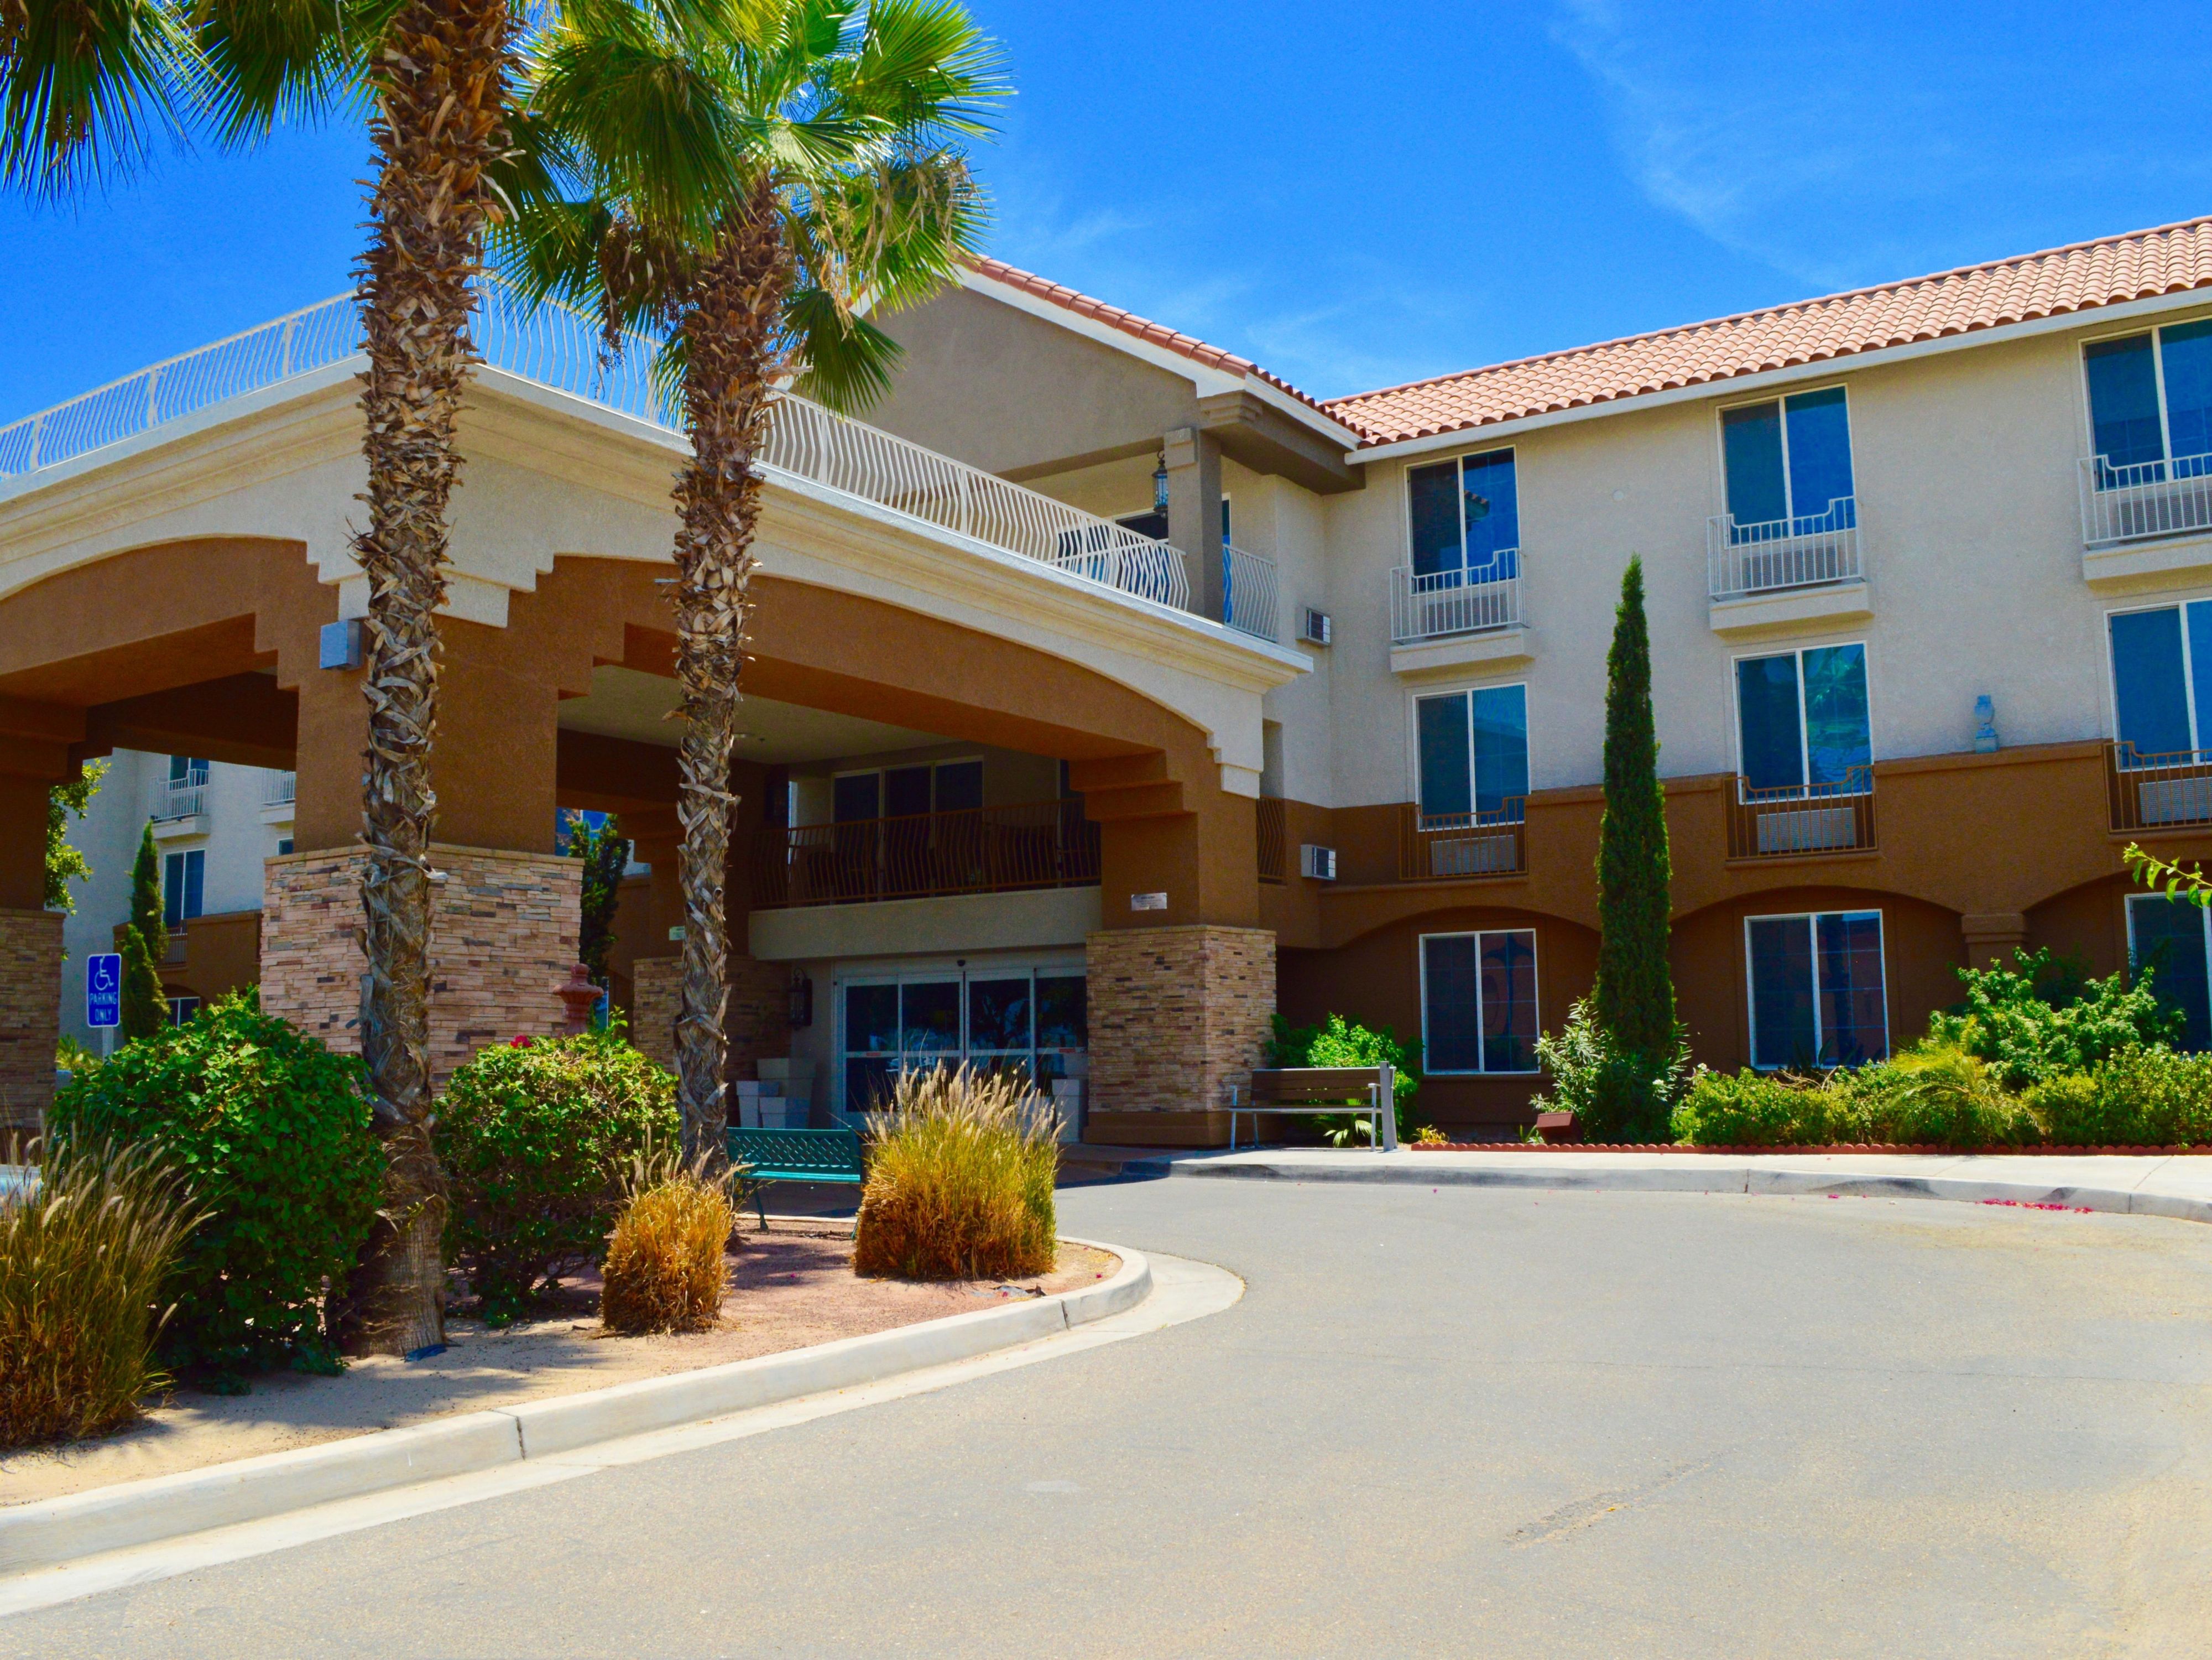 Budget Hotels in Calexico, CA | Holiday Inn Express Calexico